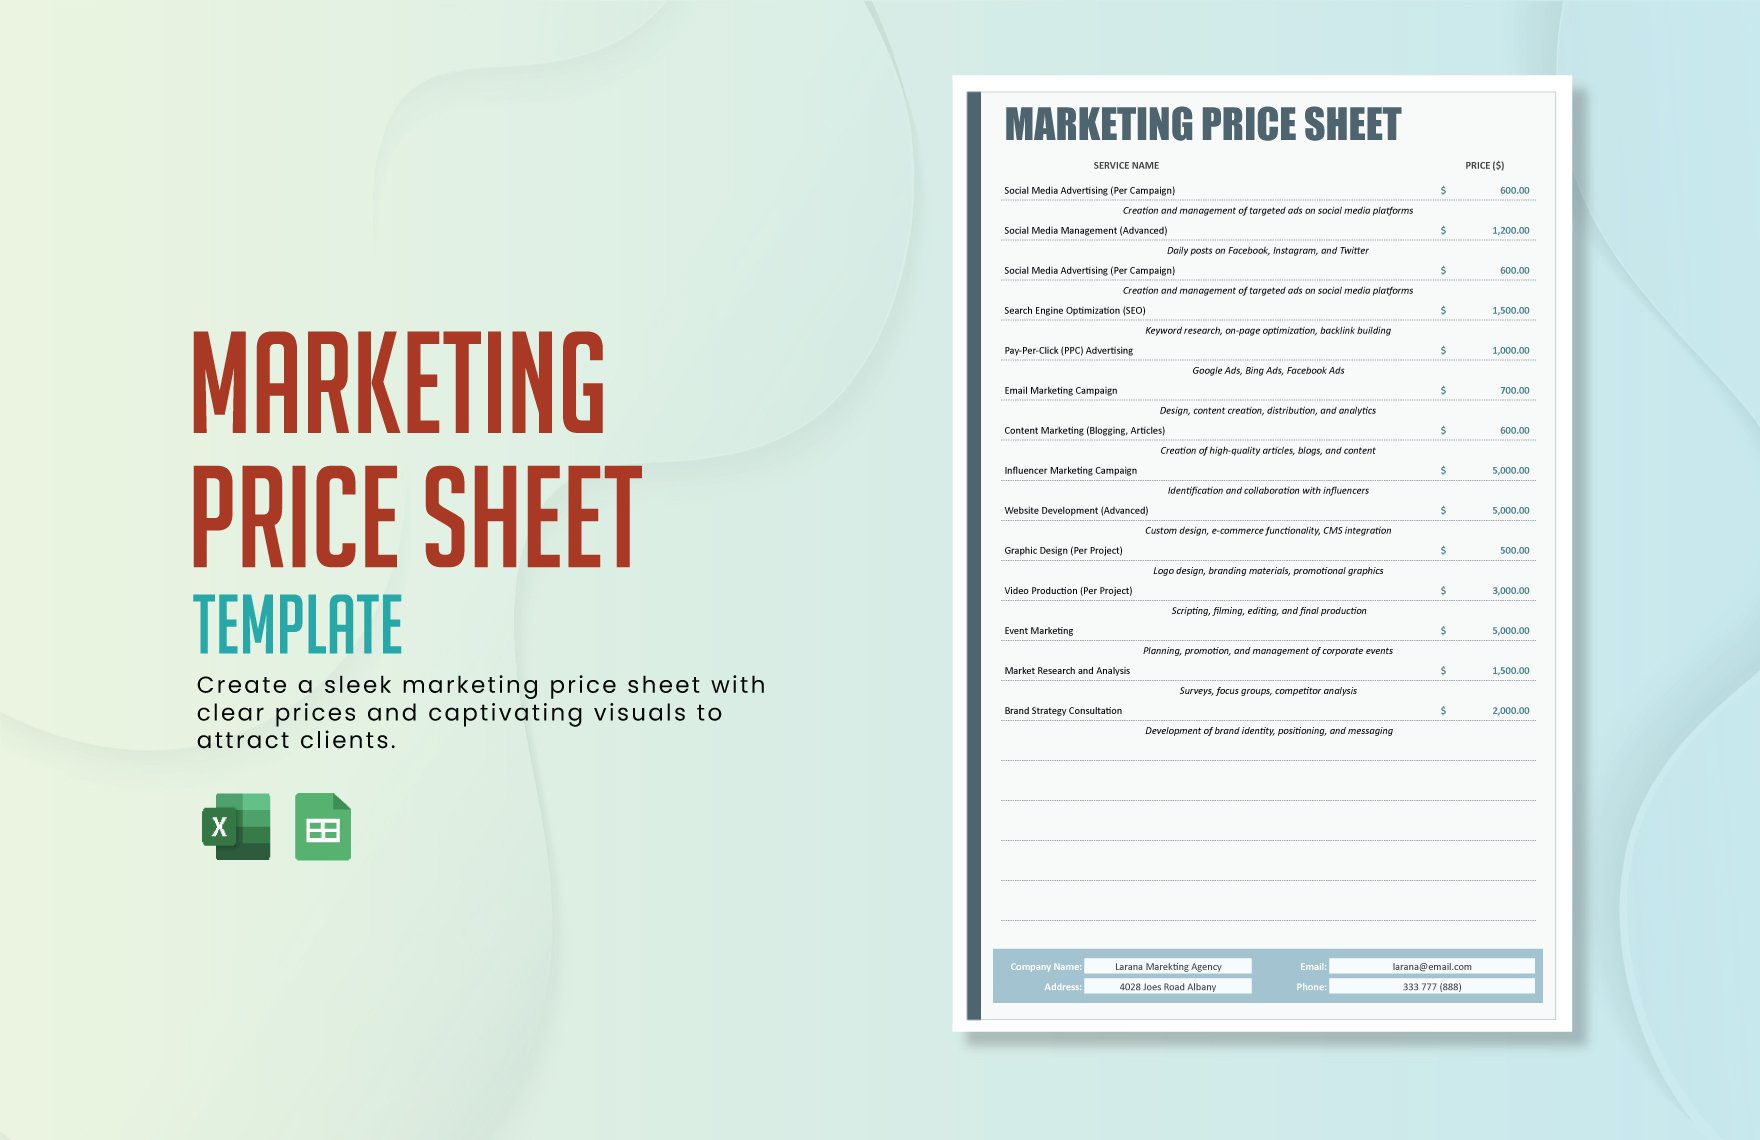 Marketing Price Sheet Template in Excel, Google Sheets